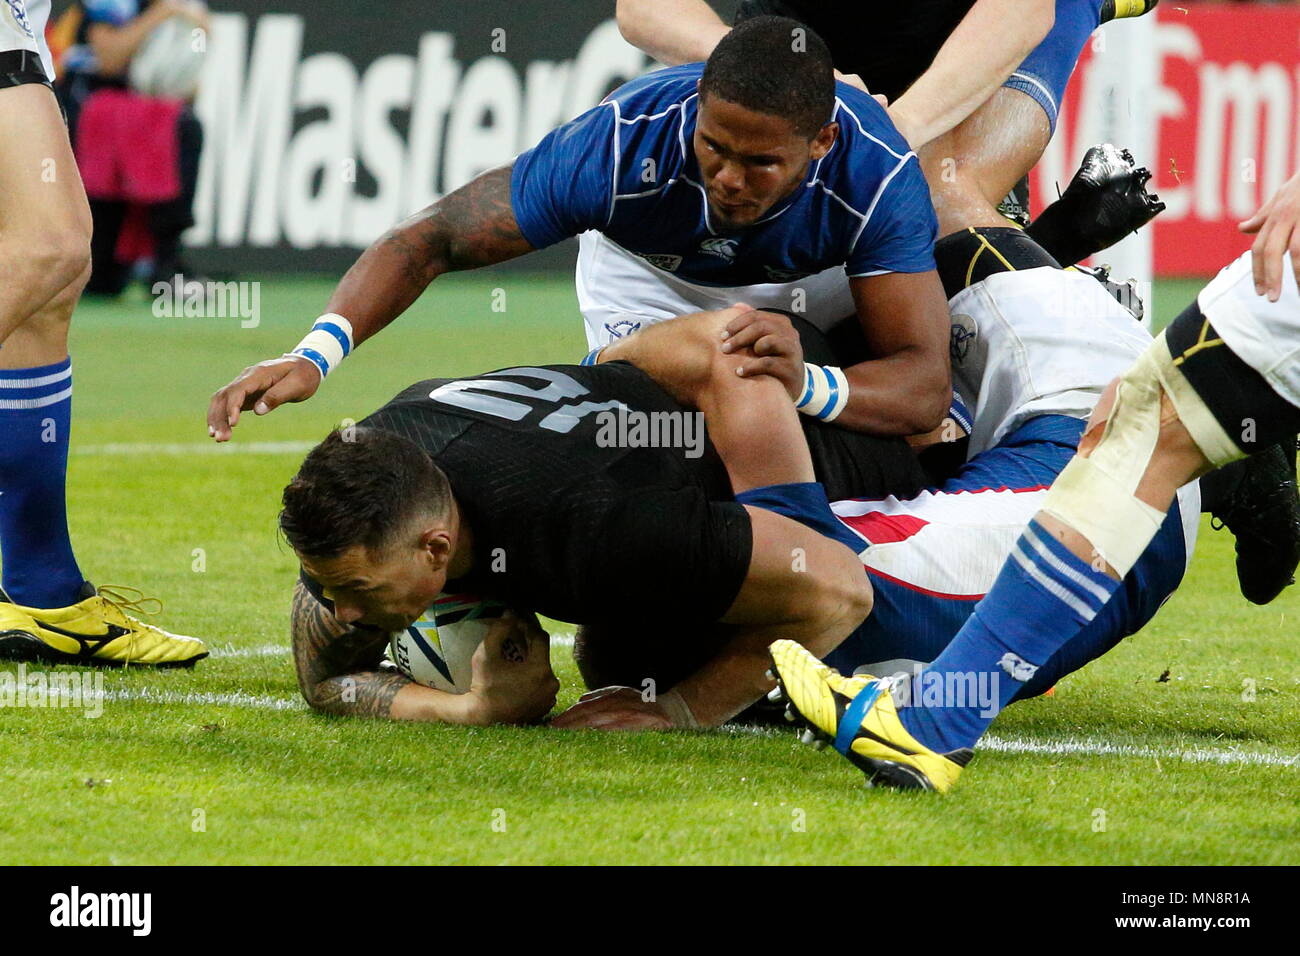 Sonny Bill Williams reaches for the try line for the NZL All Blacks during the IRB RWC 2015 match between New Zealand All Blacks v Namibia- Pool C Match 12 at The Stadium, Queen Elizabeth Olympic Park. London, England. 24 September 2015 Stock Photo